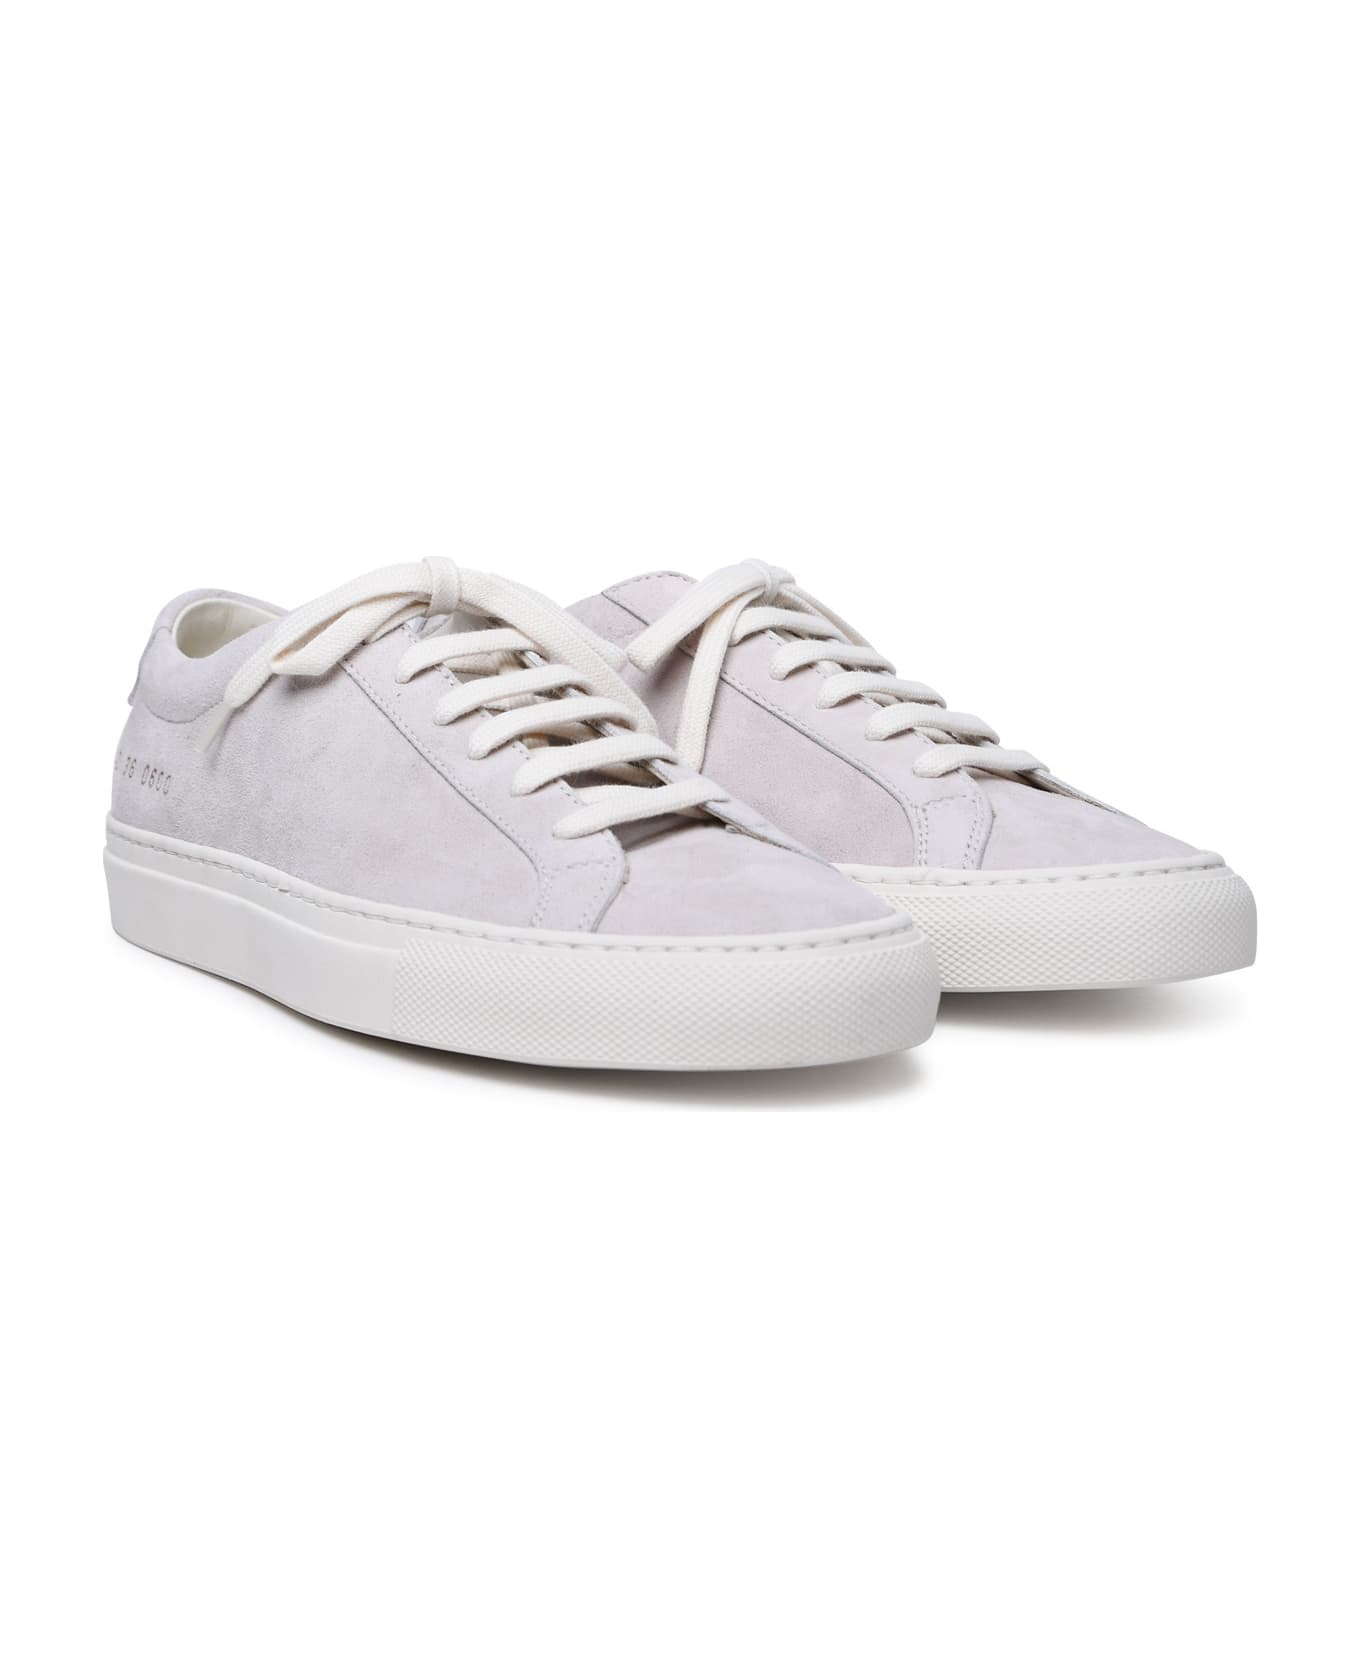 Common Projects Achilles Low Sneakers - Nude